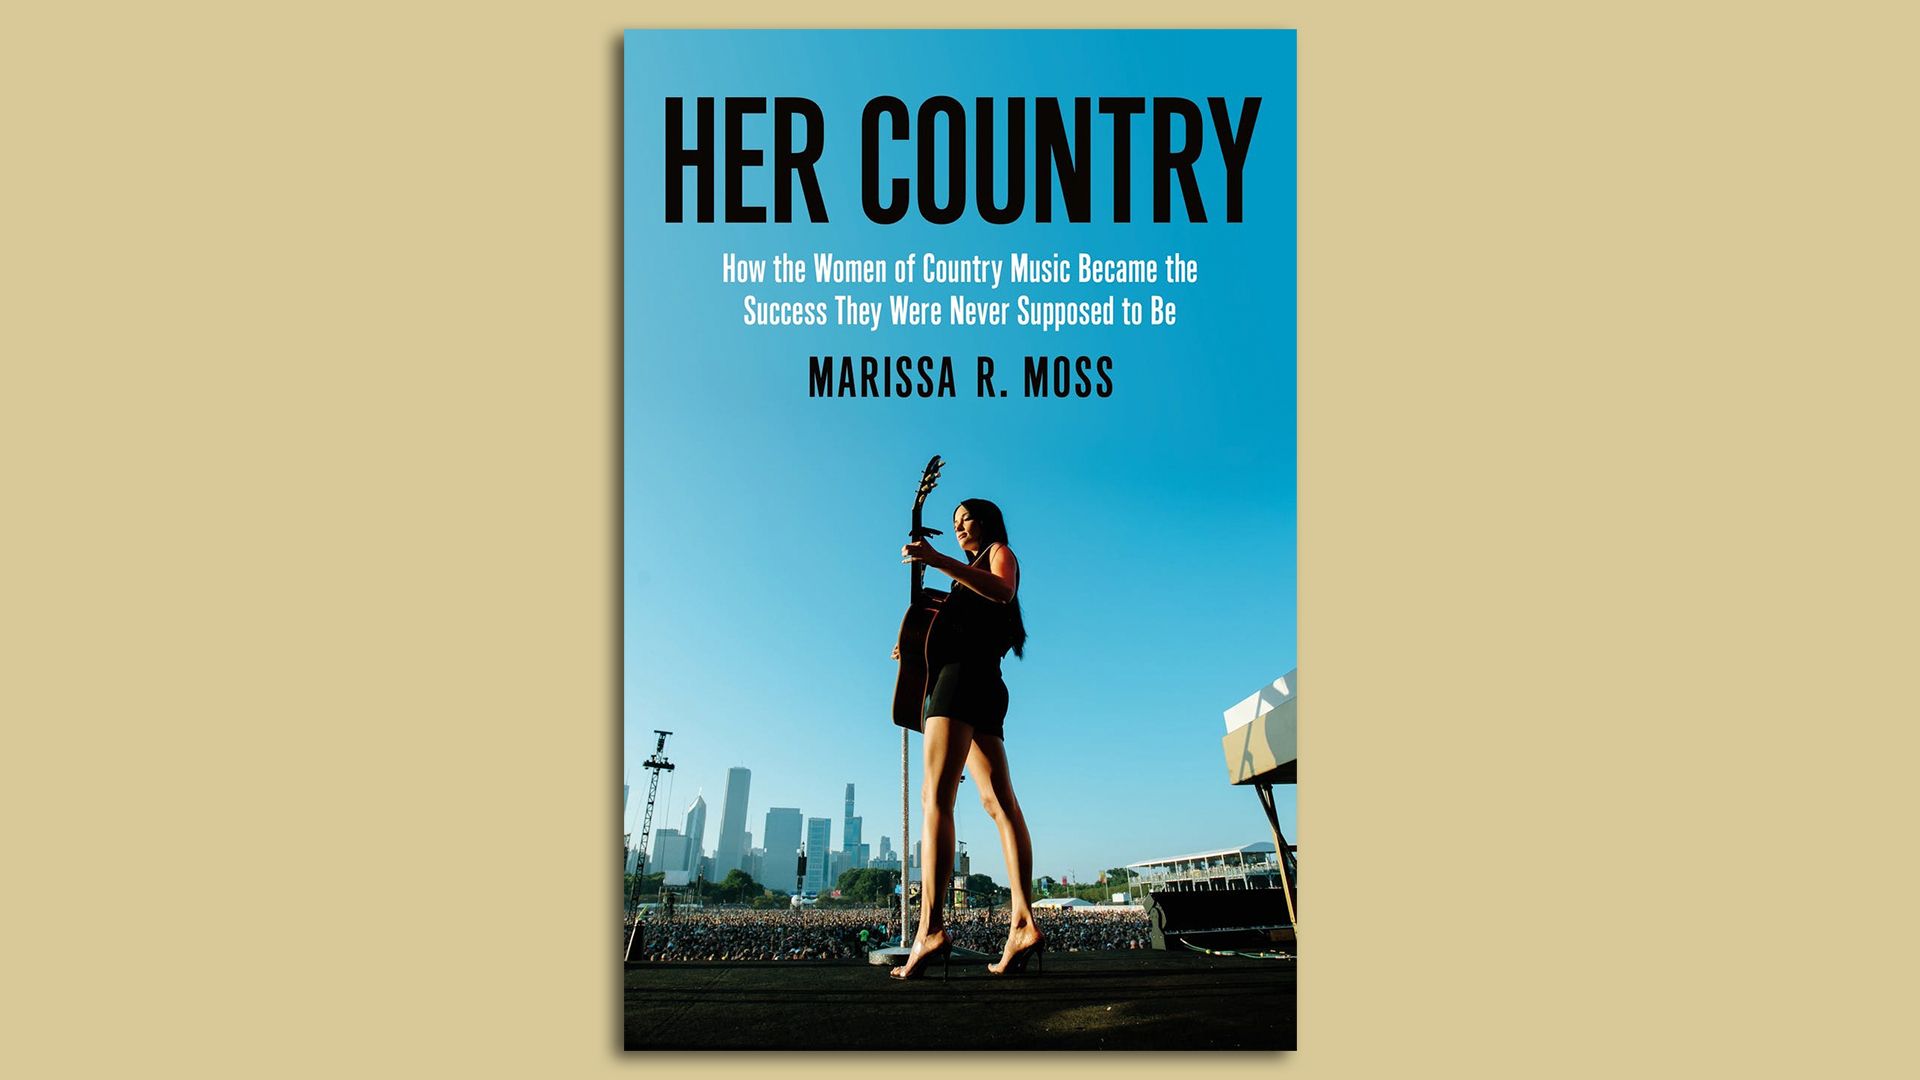 The book cover of "Her Country"